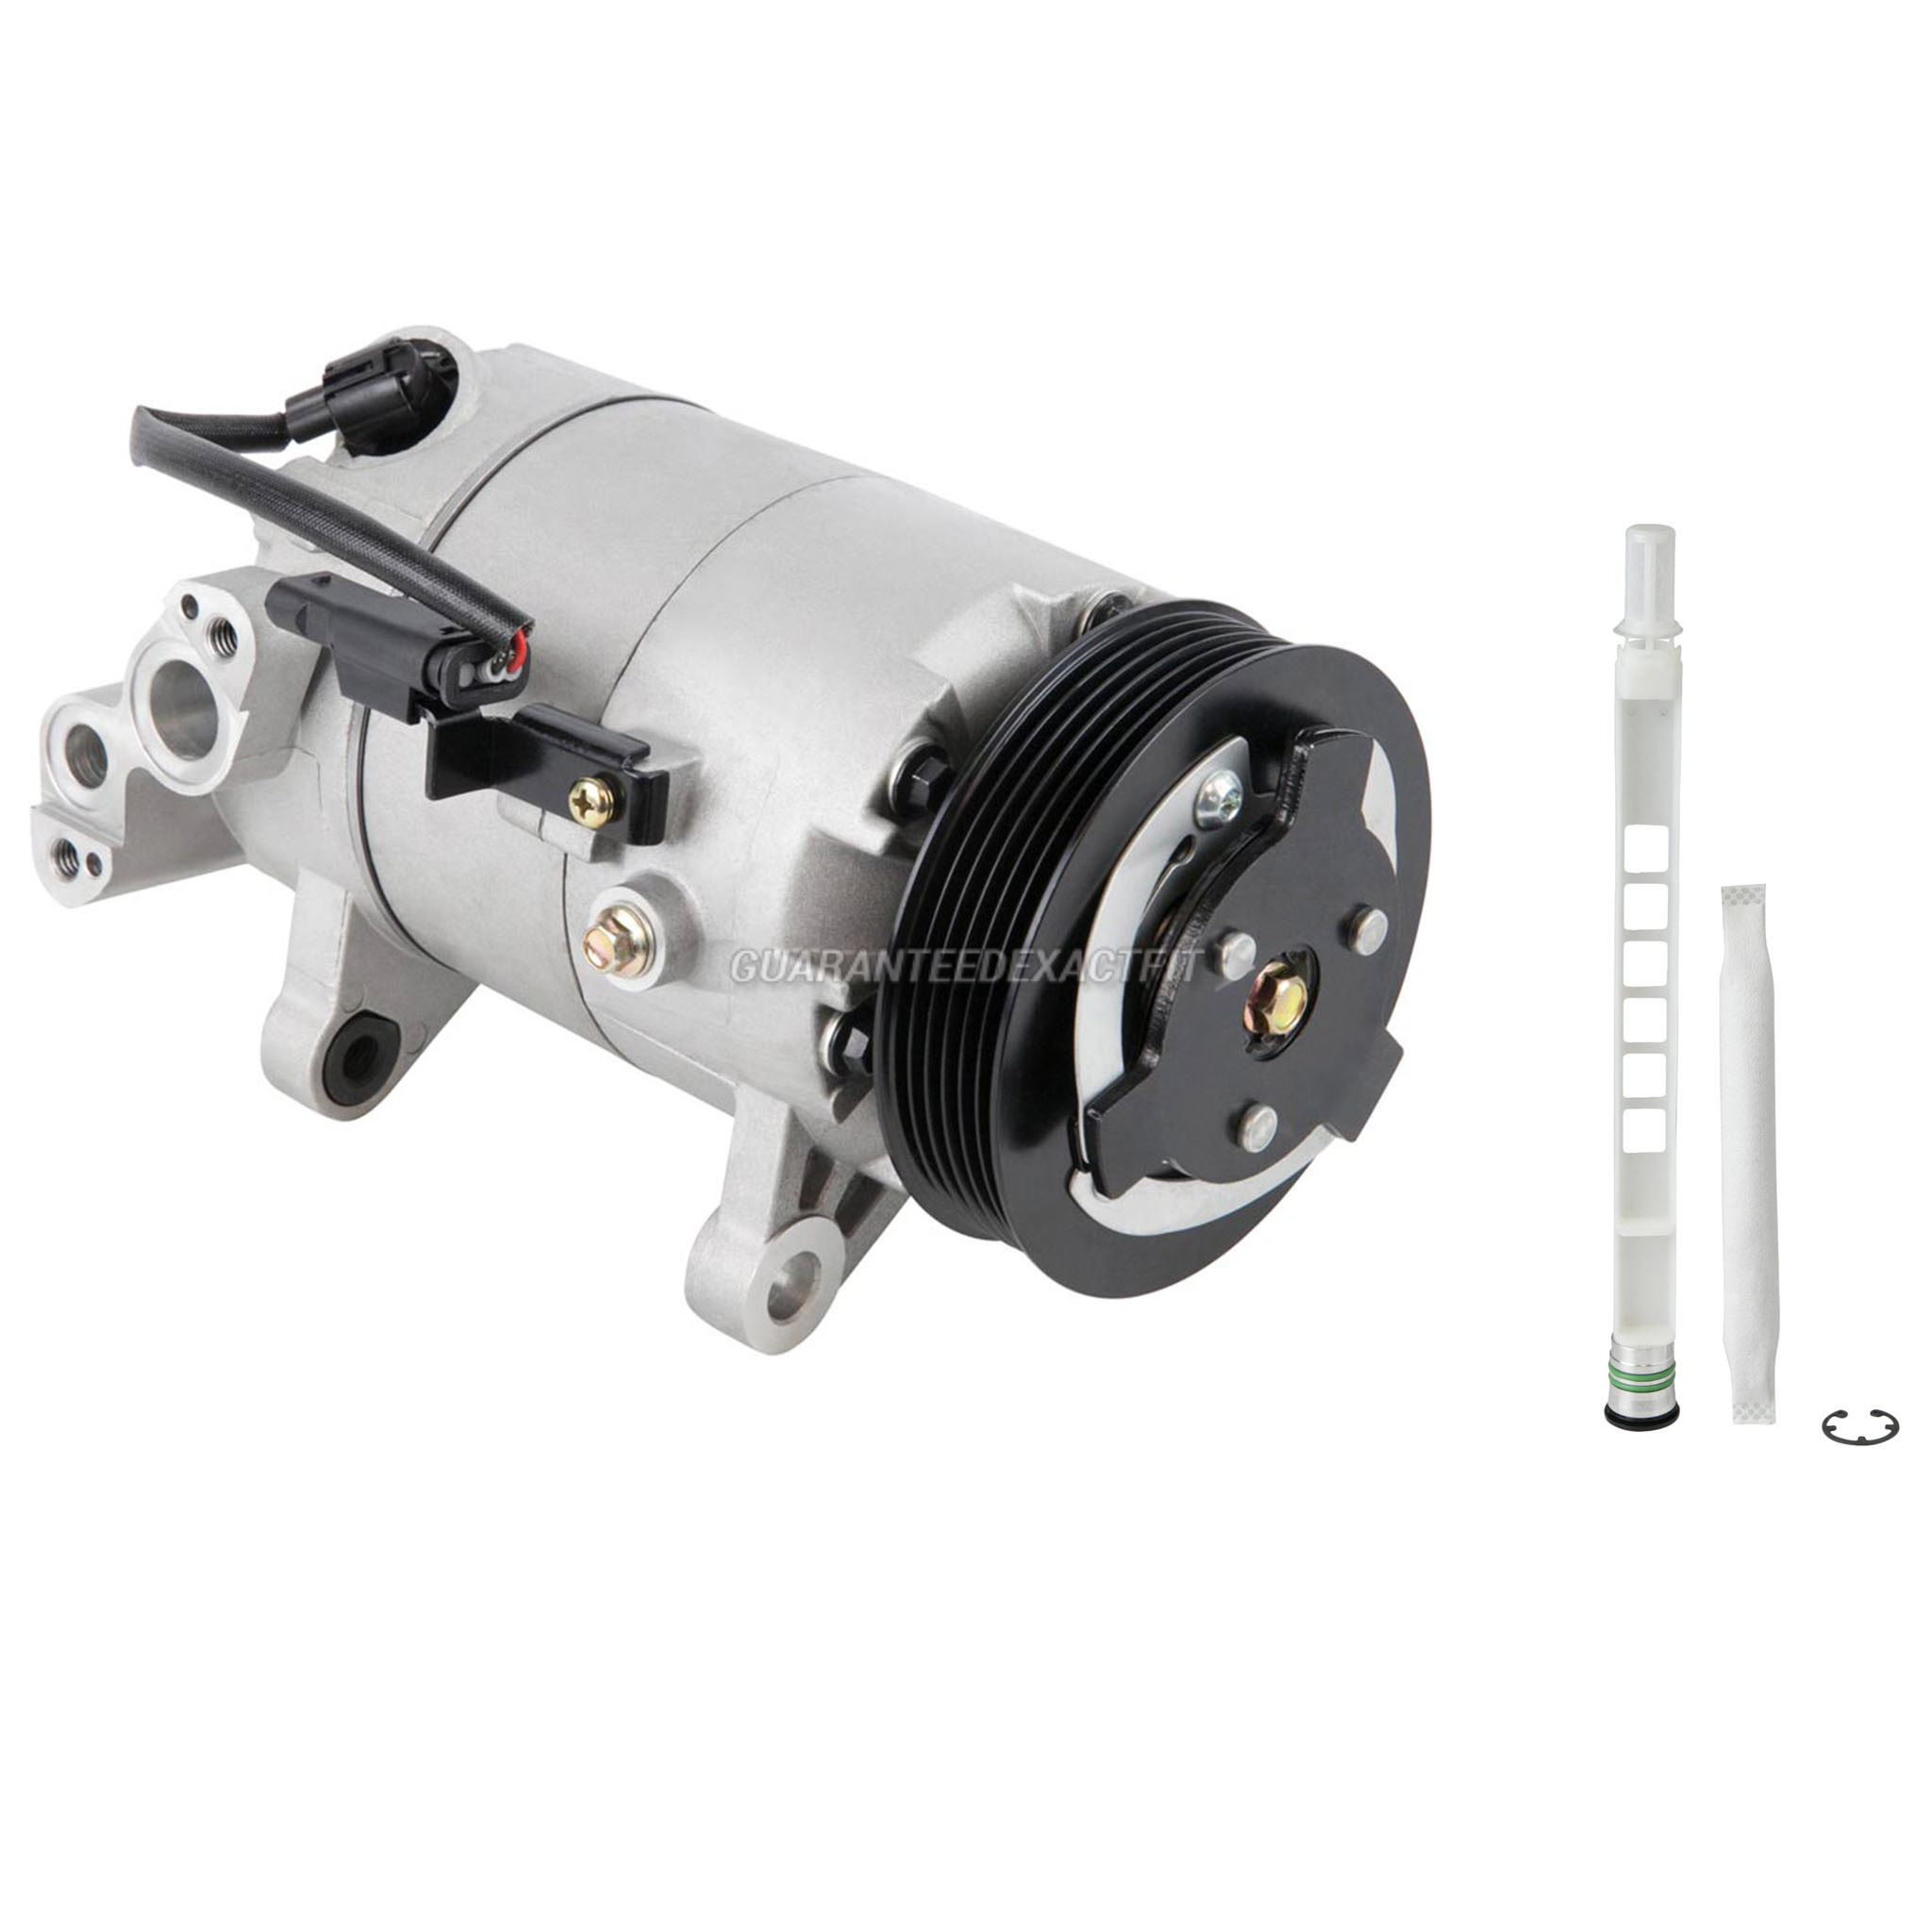  Bmw x2 a/c compressor and components kit 